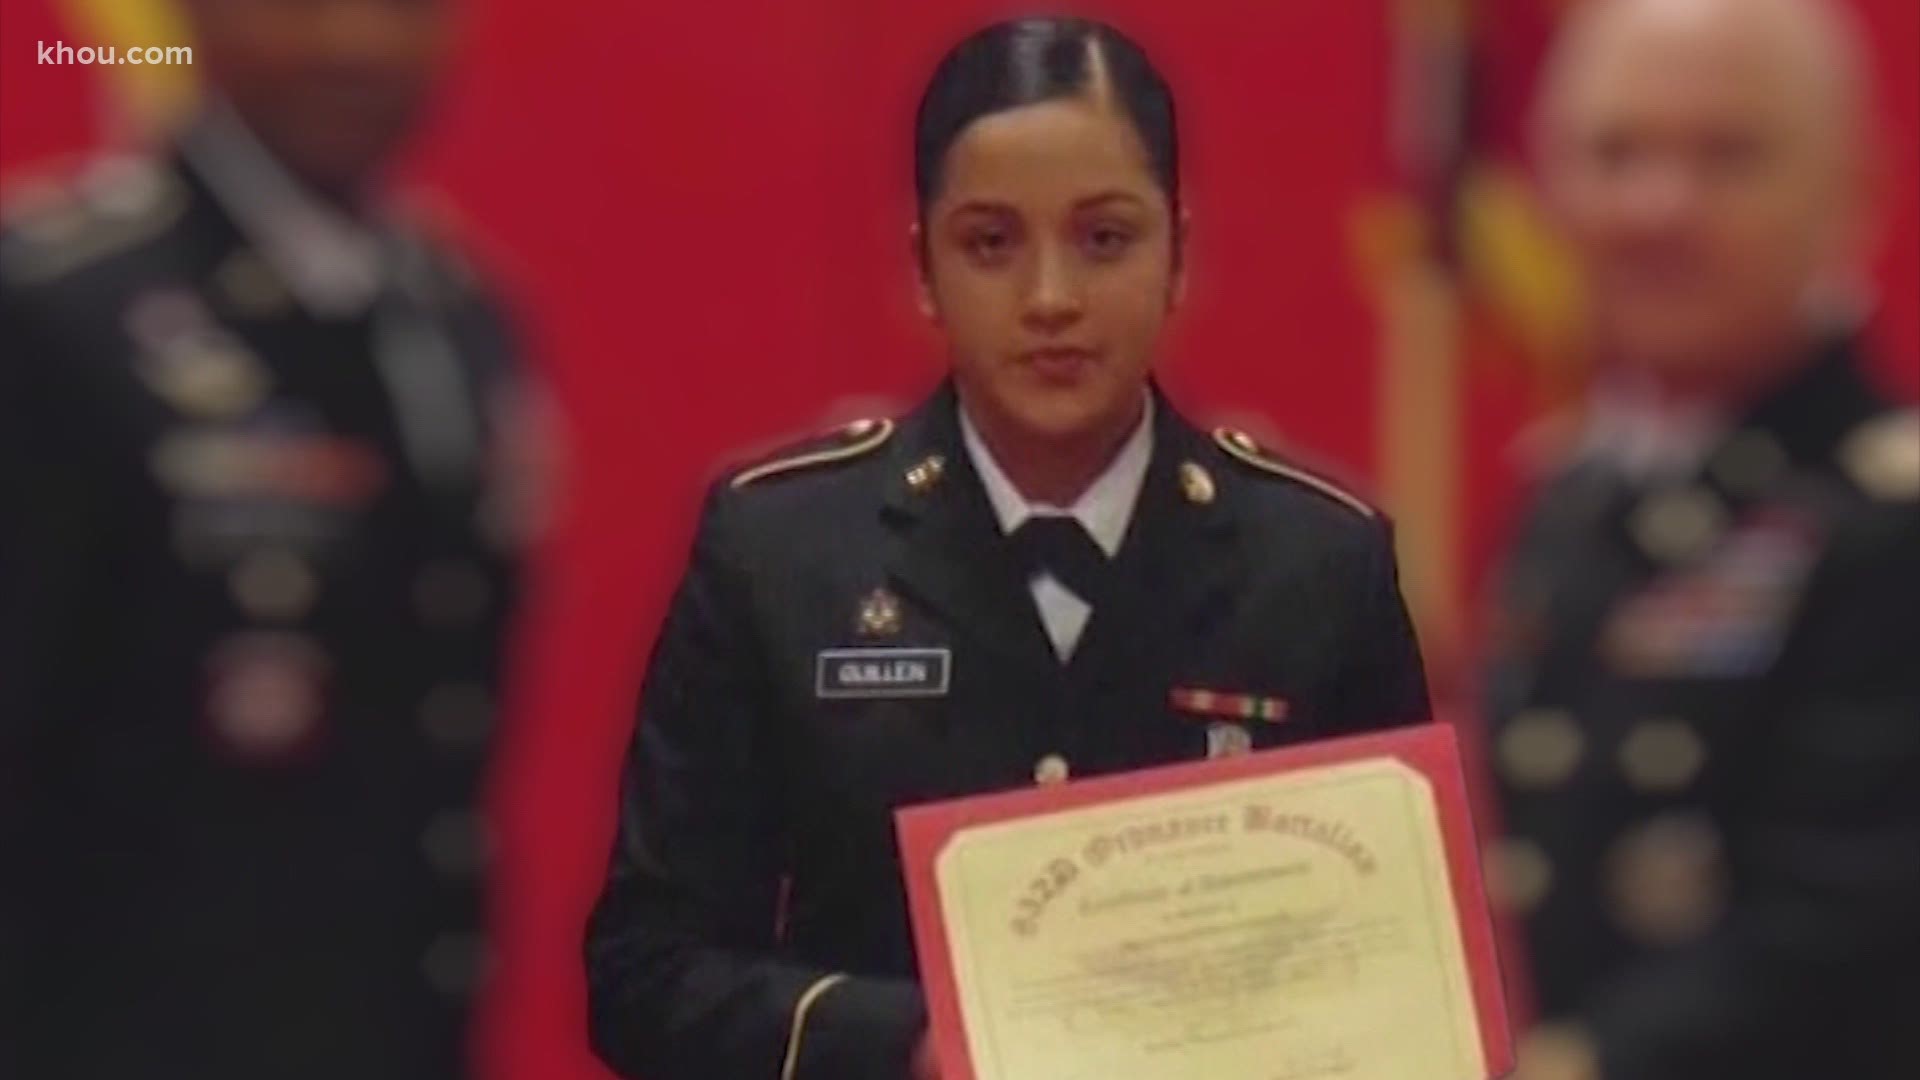 Remains Identified As Those Of Missing Fort Hood Soldier Vanessa